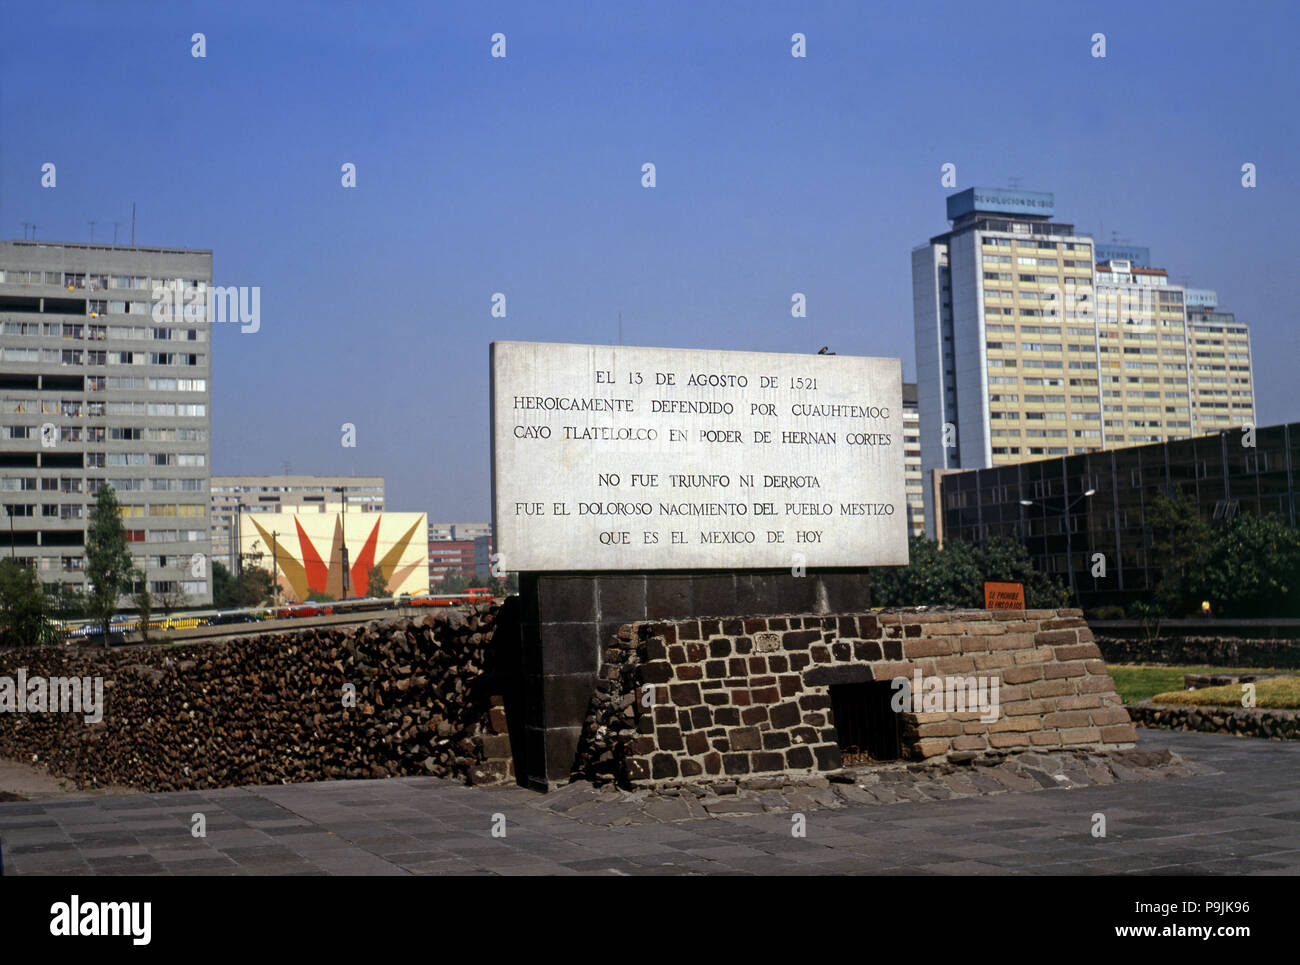 Tlatelolco Ruins, ancient Aztec city, located on the shores of Lake Texcoco now desiccated, in 15… Stock Photo